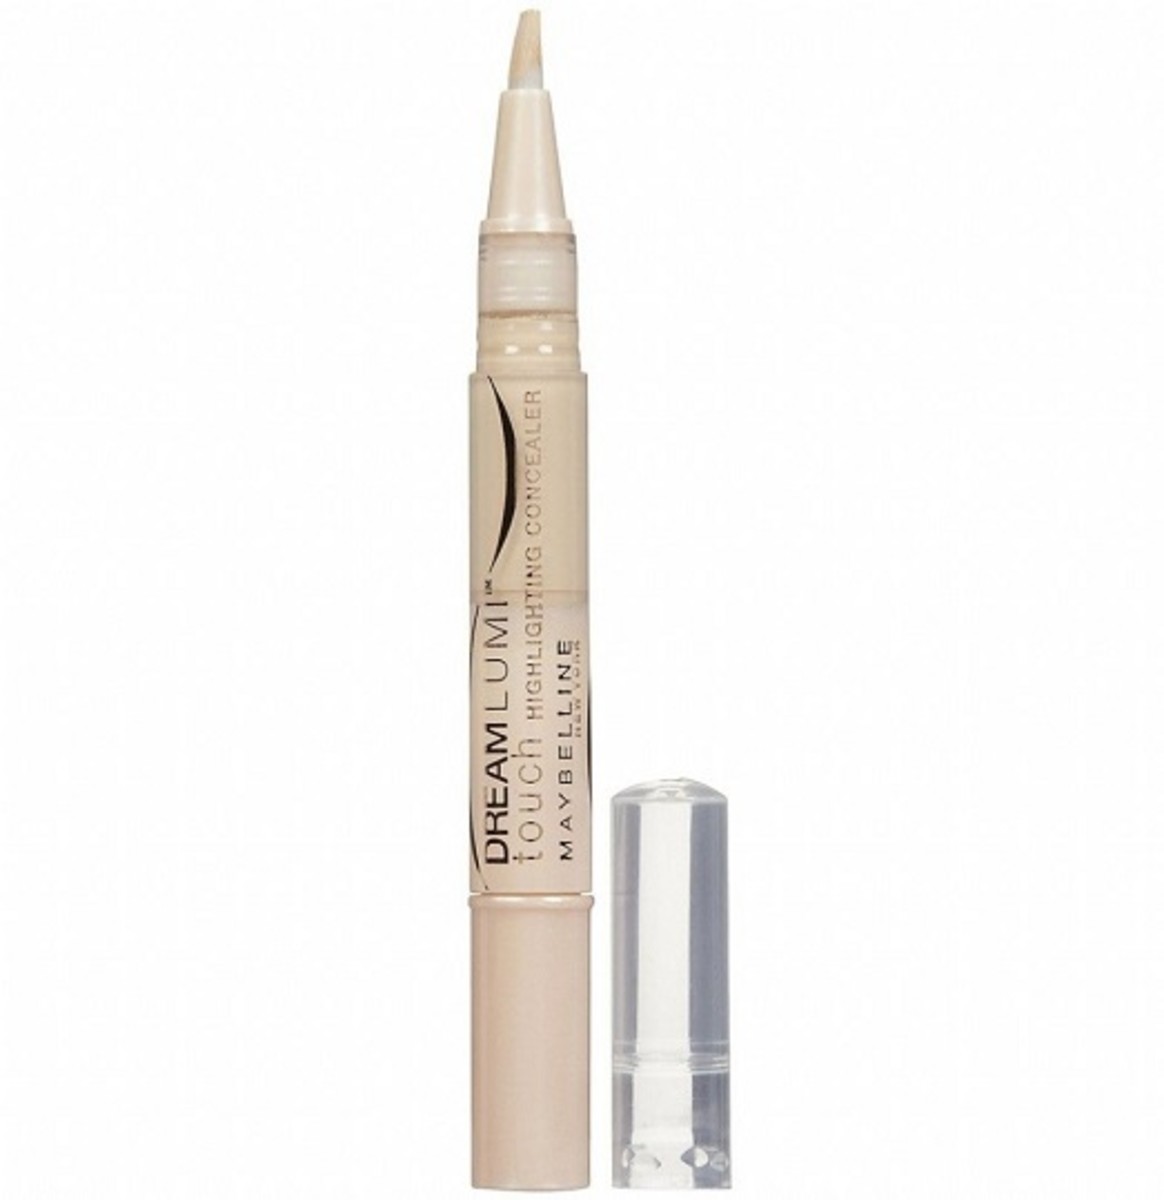 Maybelline Dream Lumi Touch Concealer covers as well as highlights.